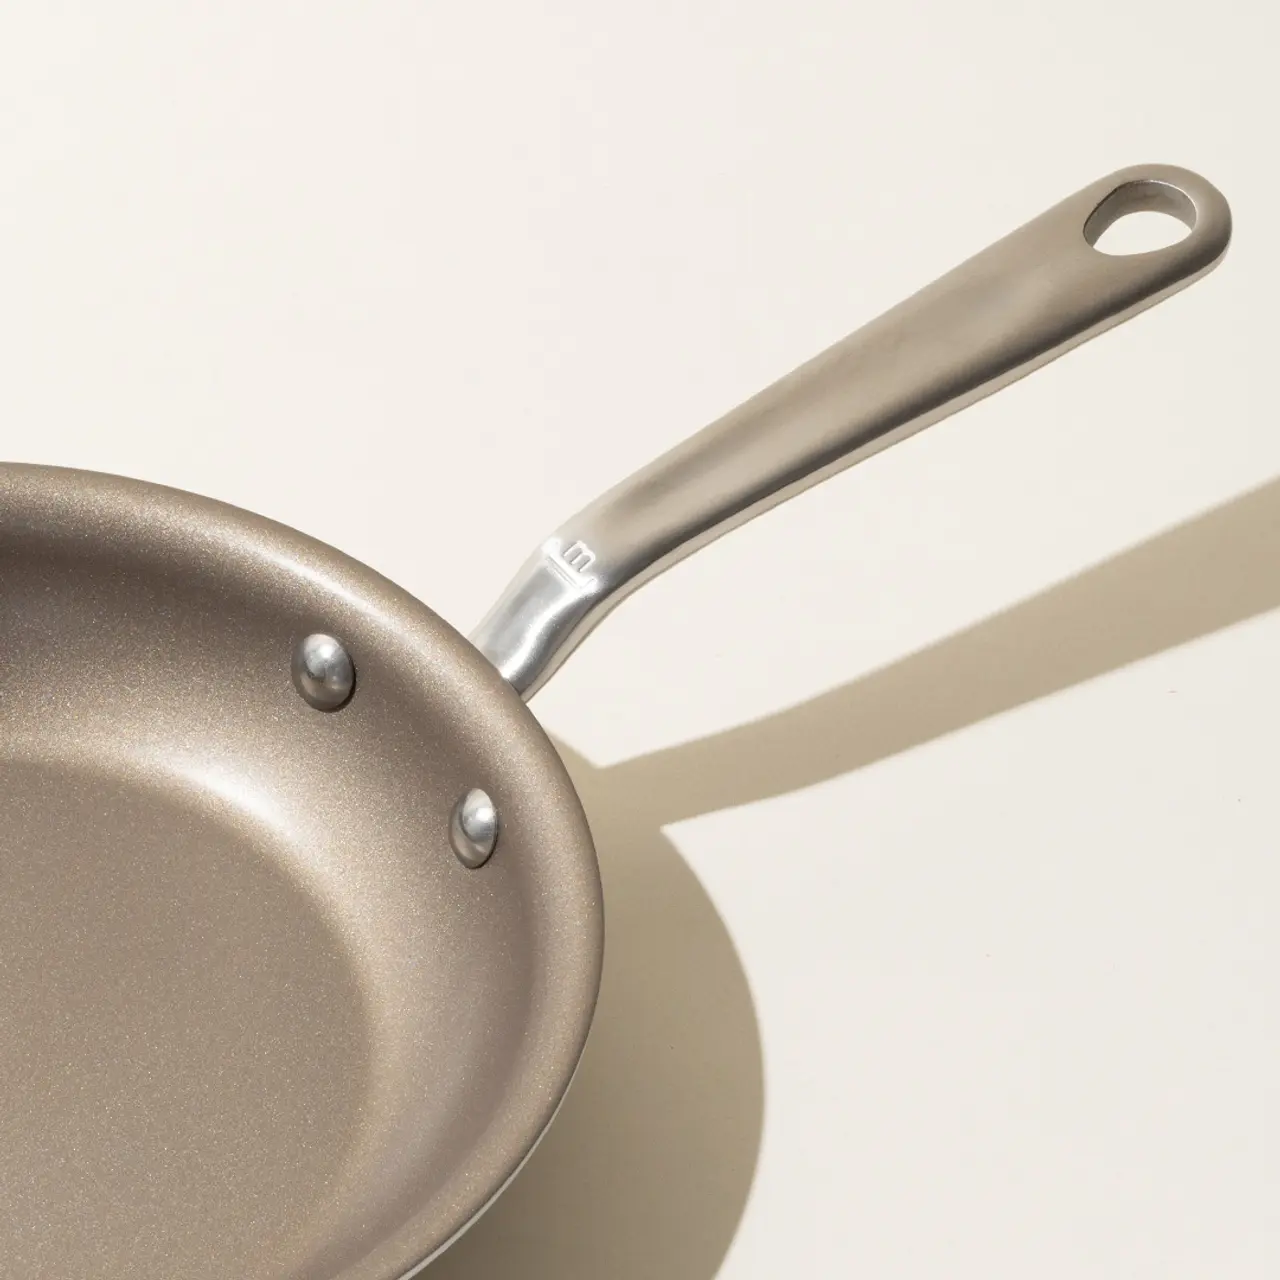 A non-stick frying pan with a stainless steel handle on a light background, casting a shadow.